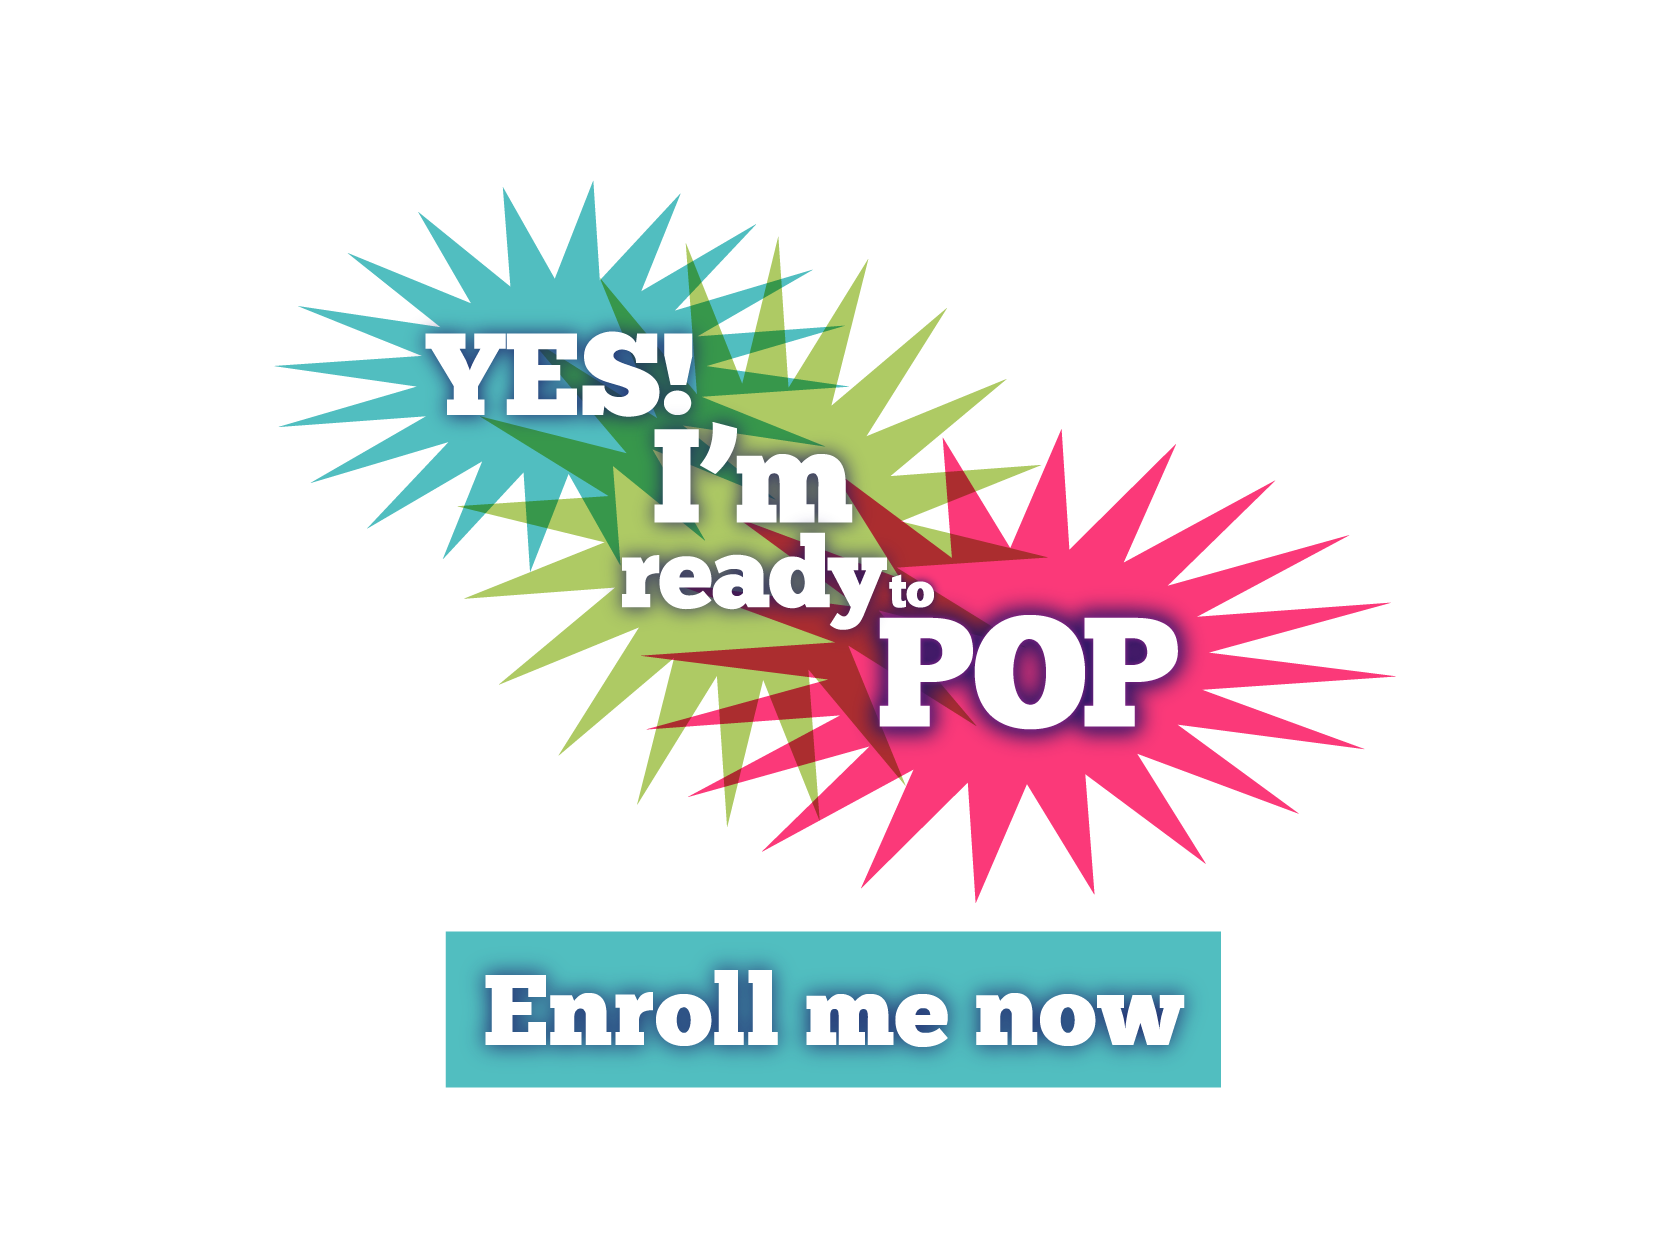 Yes! Enroll Me Now!